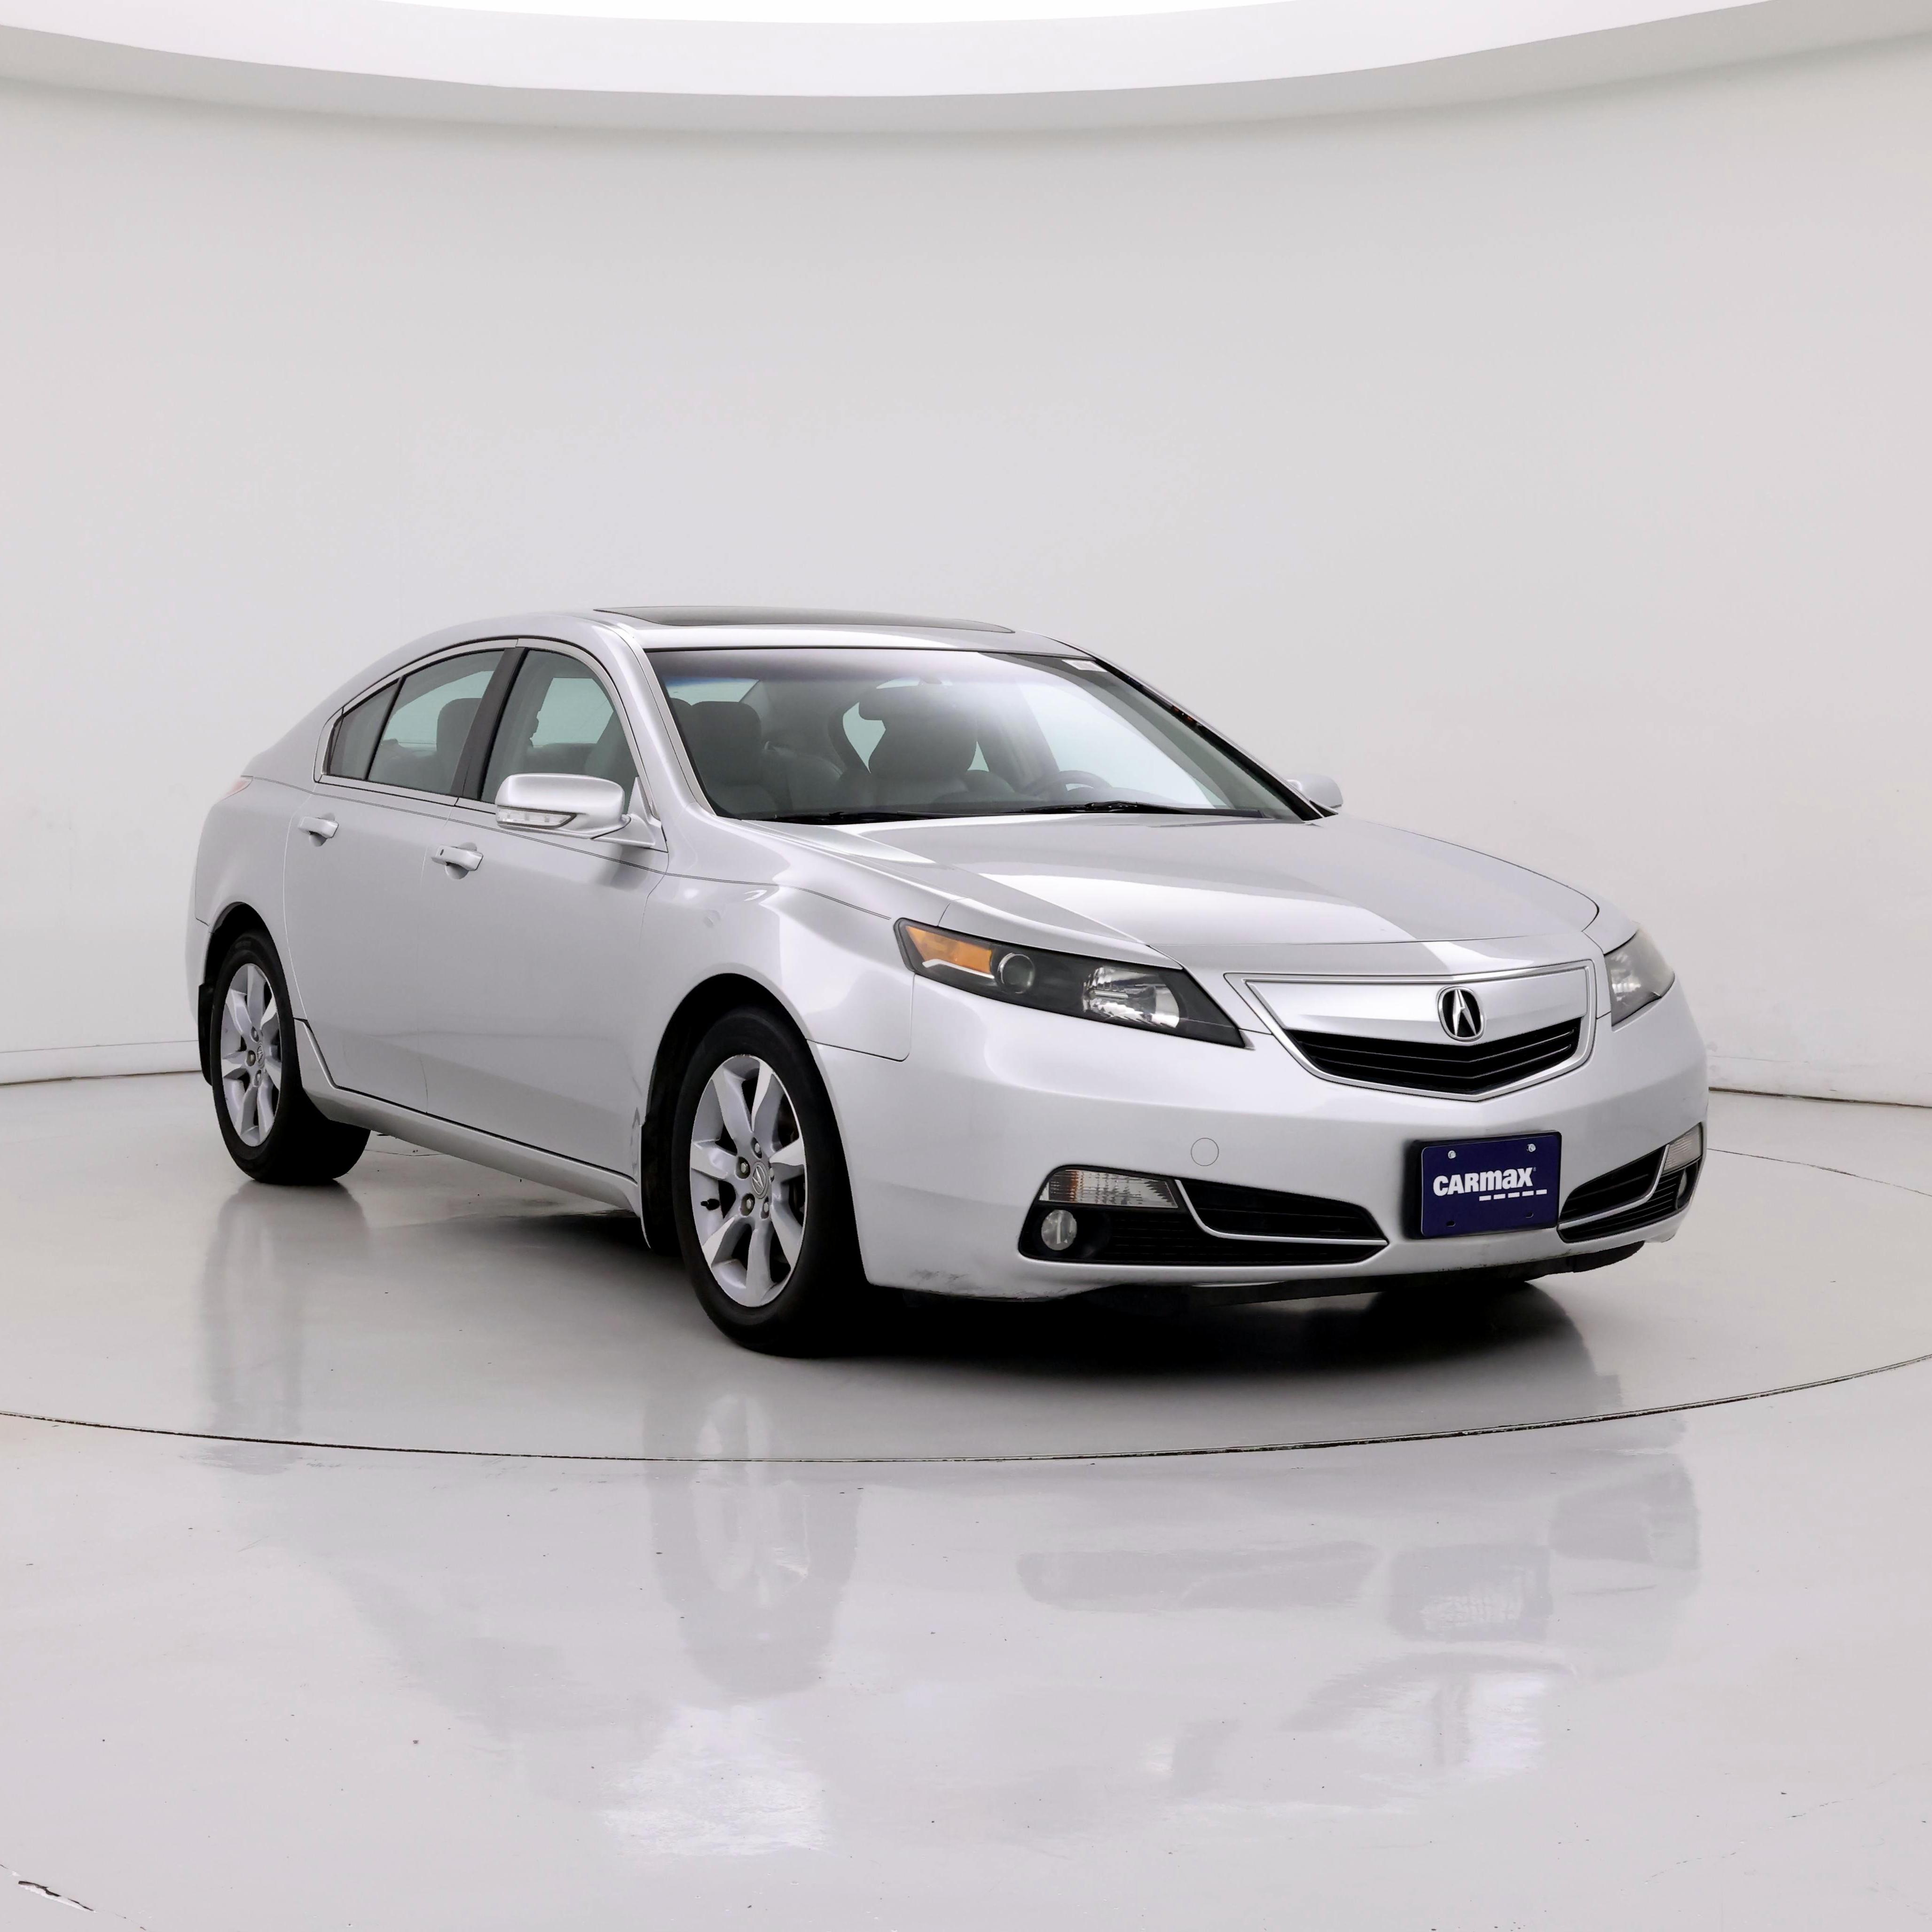 2012 Acura TL FWD with Technology Package